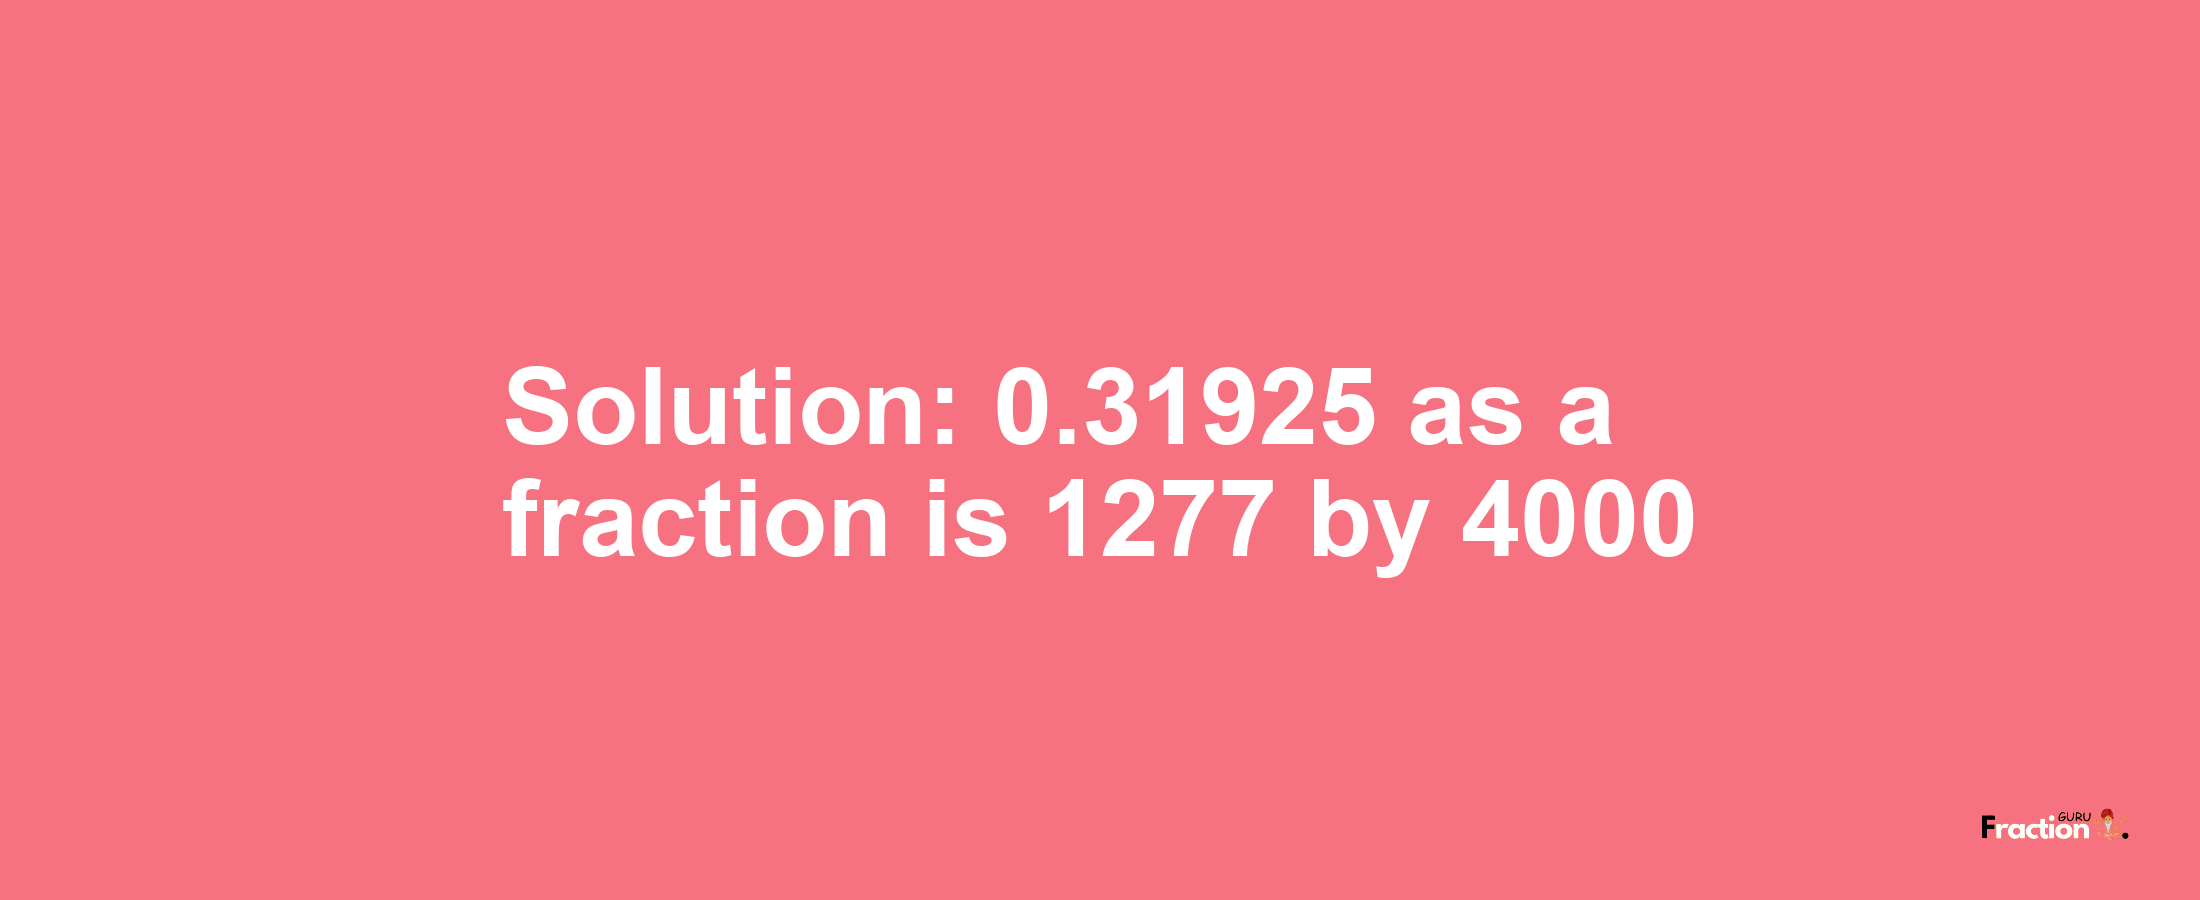 Solution:0.31925 as a fraction is 1277/4000